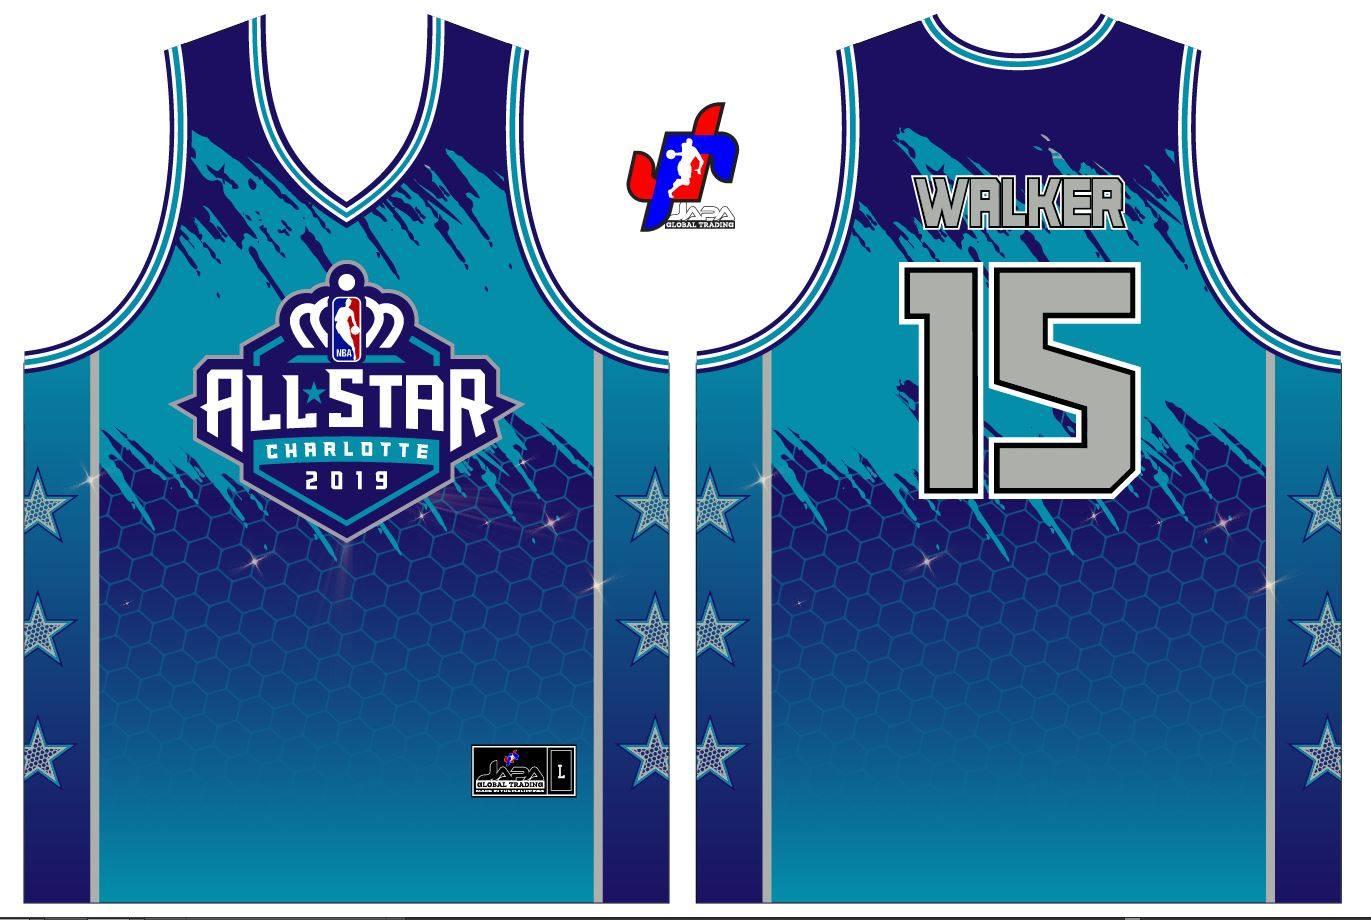 sublimated basketball jersey 2019